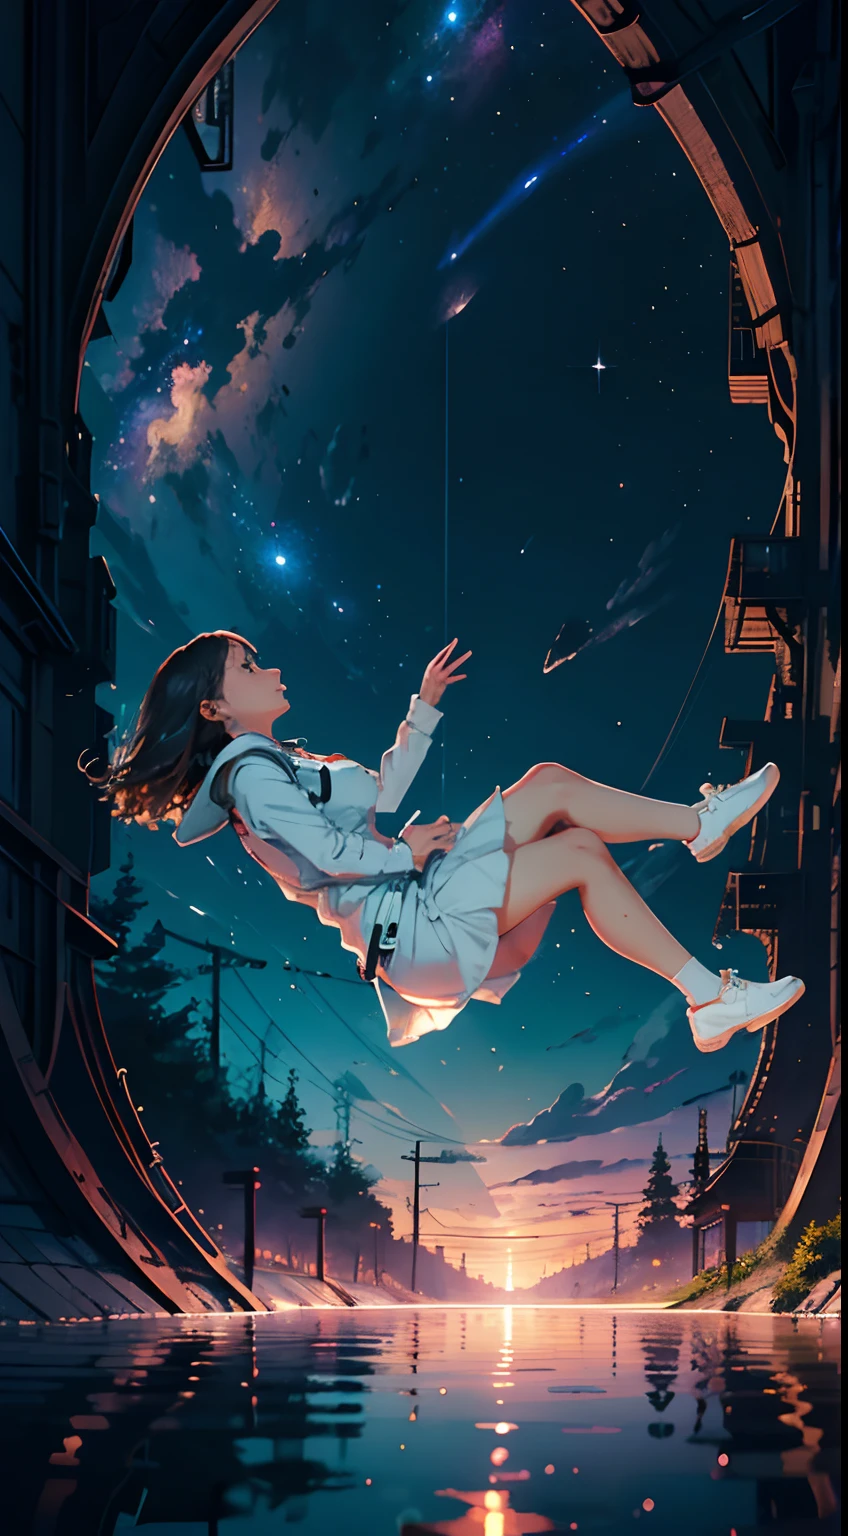 masterpiece, a cute girl falling in a river, falling_blur, cosmic, reflections, cosmos, best quality, wallpaper, space suit, epic, depth , gorgeous, intricate, detailed, from side, perspective, moviment,